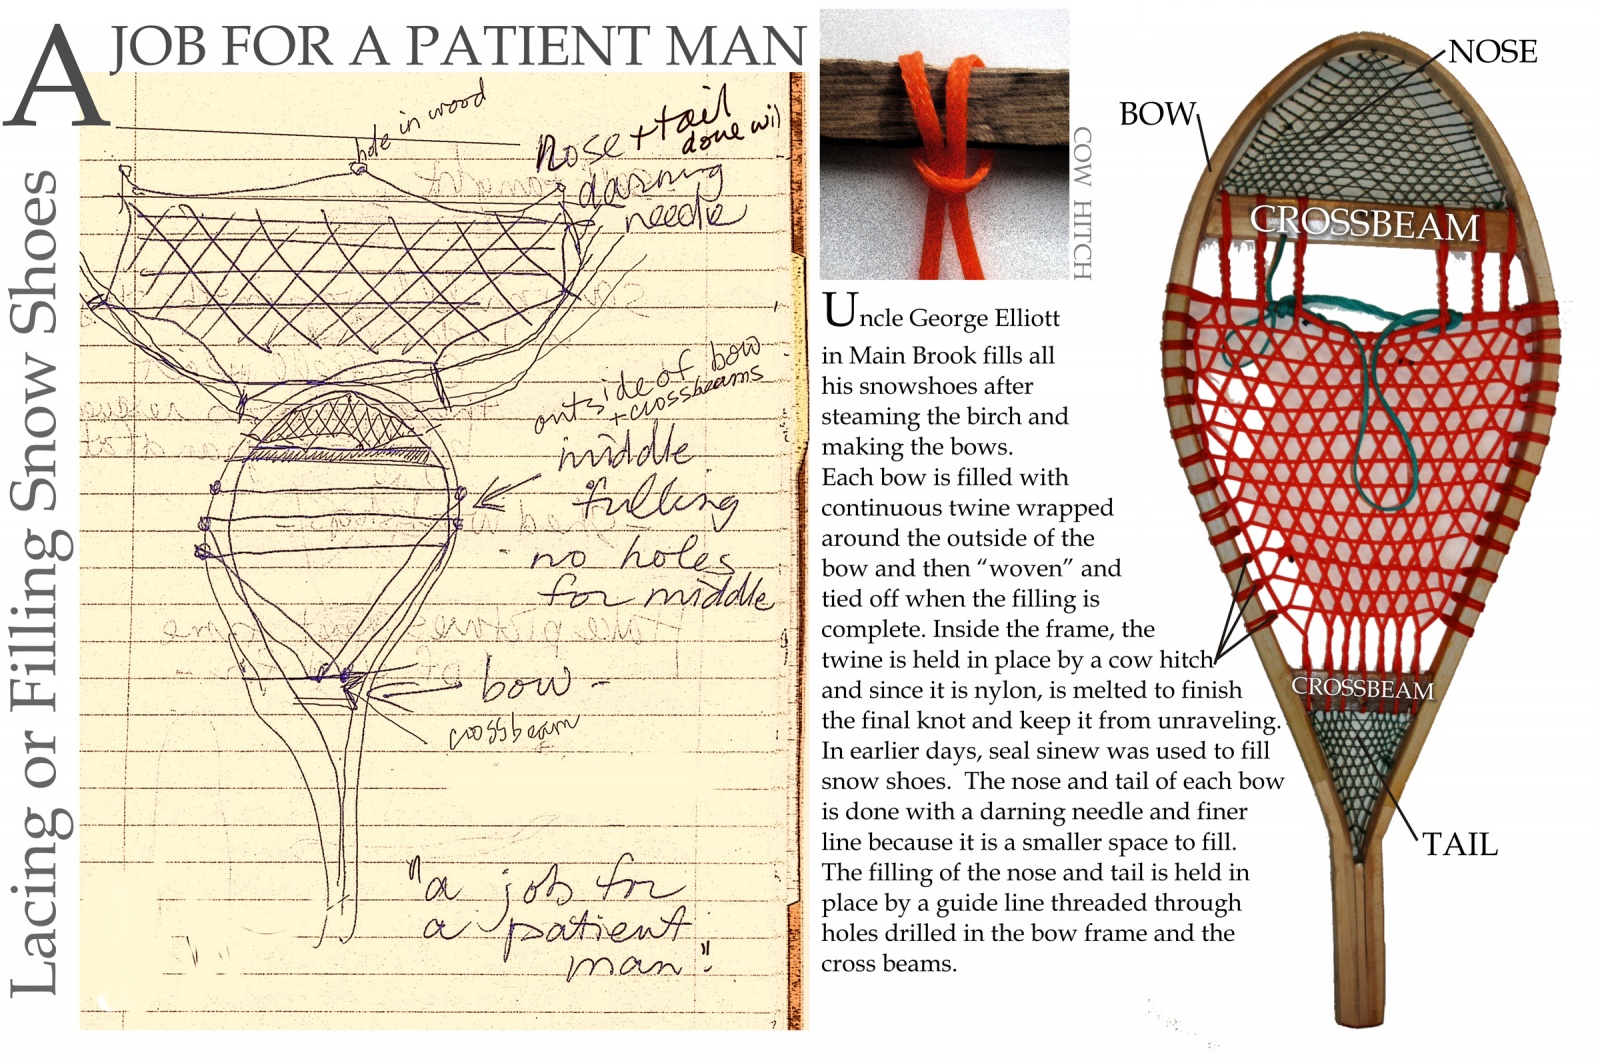 Lacing or Filling Snow Shoes: A job for a patient man